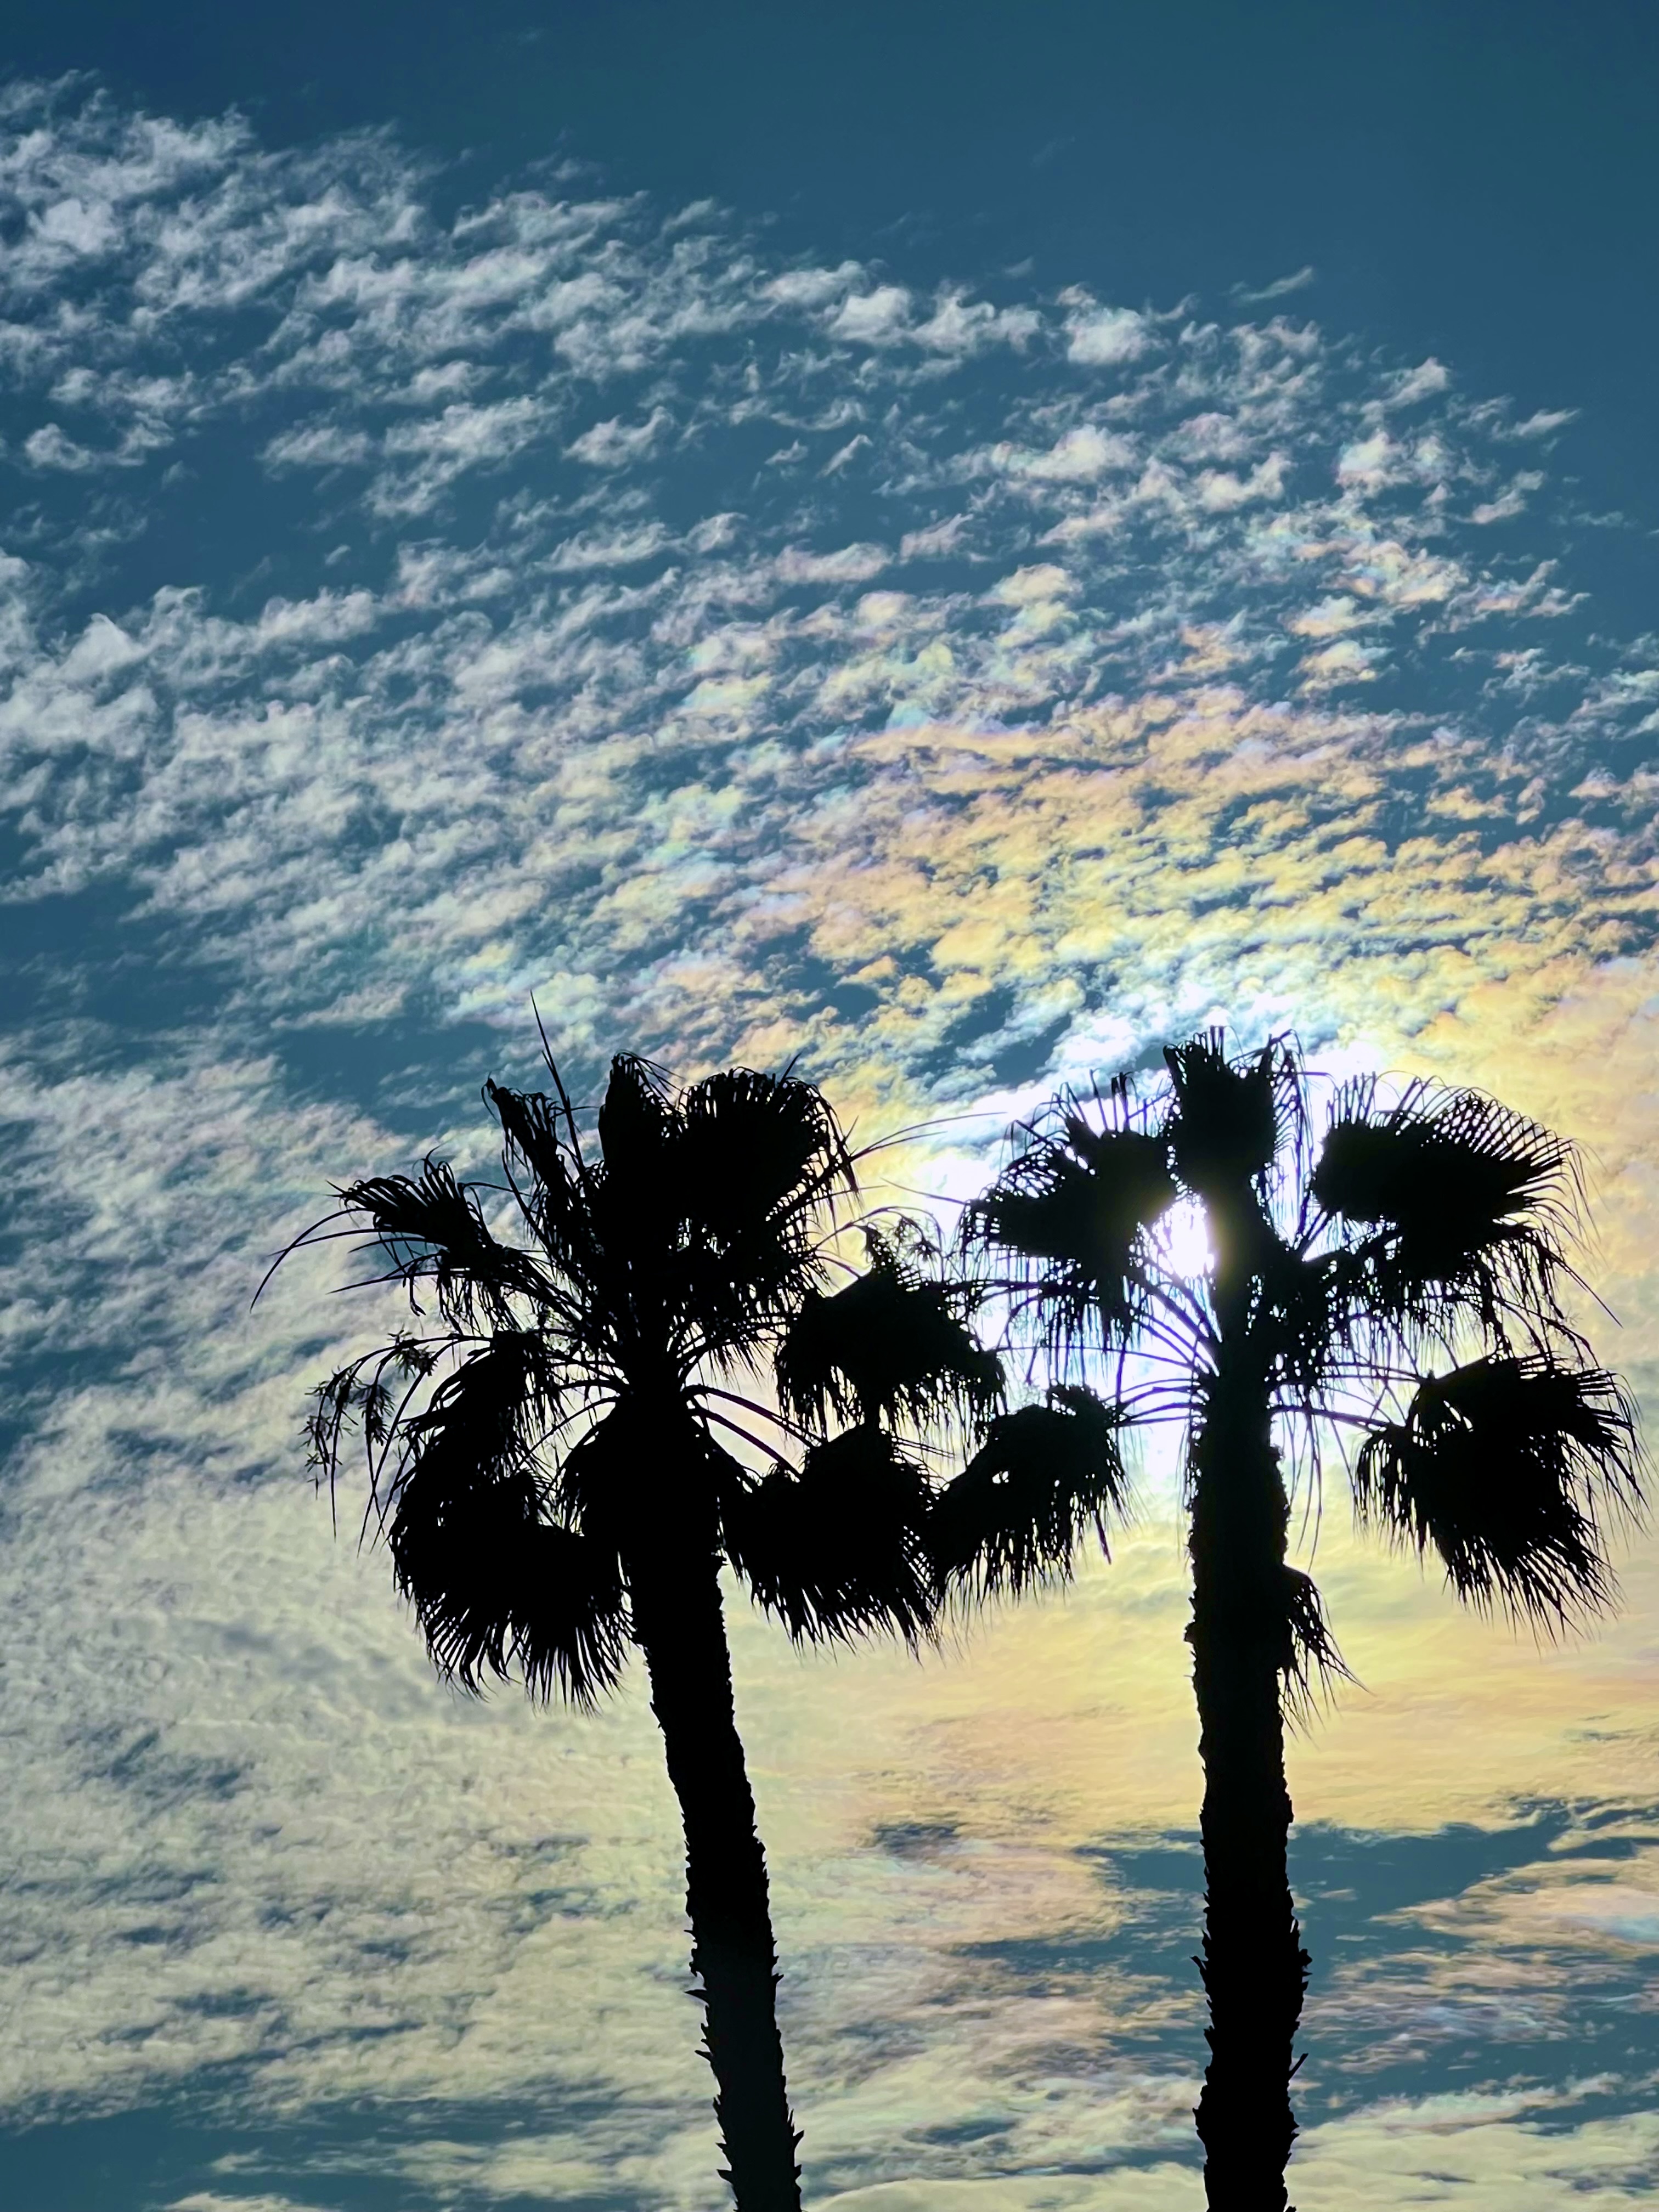 The beautiful view of Palm Pastel and sky